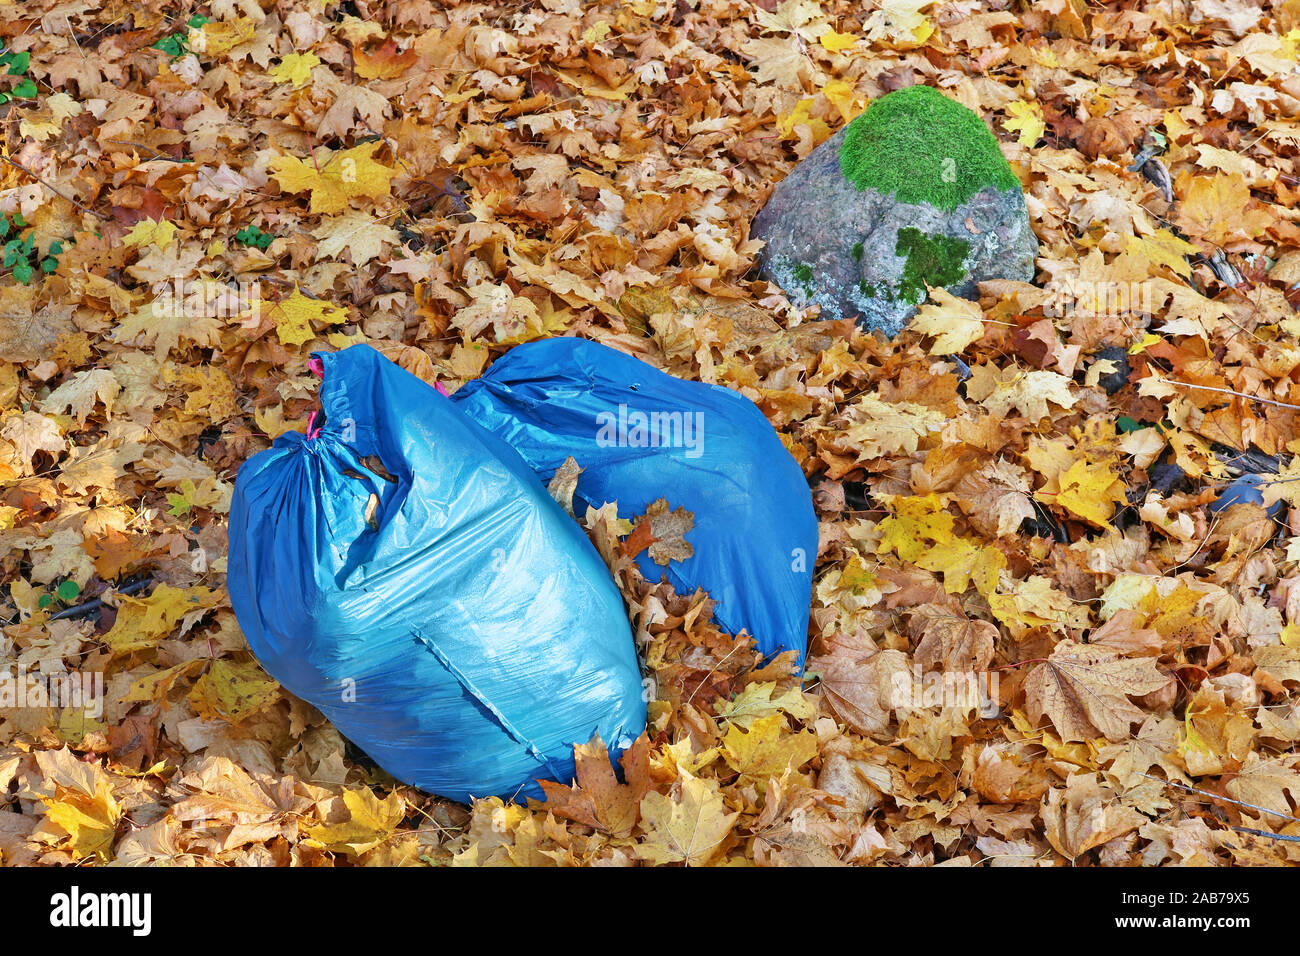 https://c8.alamy.com/comp/2AB79X5/blue-plastic-garbage-bags-left-in-the-autumn-golden-maple-forest-2AB79X5.jpg